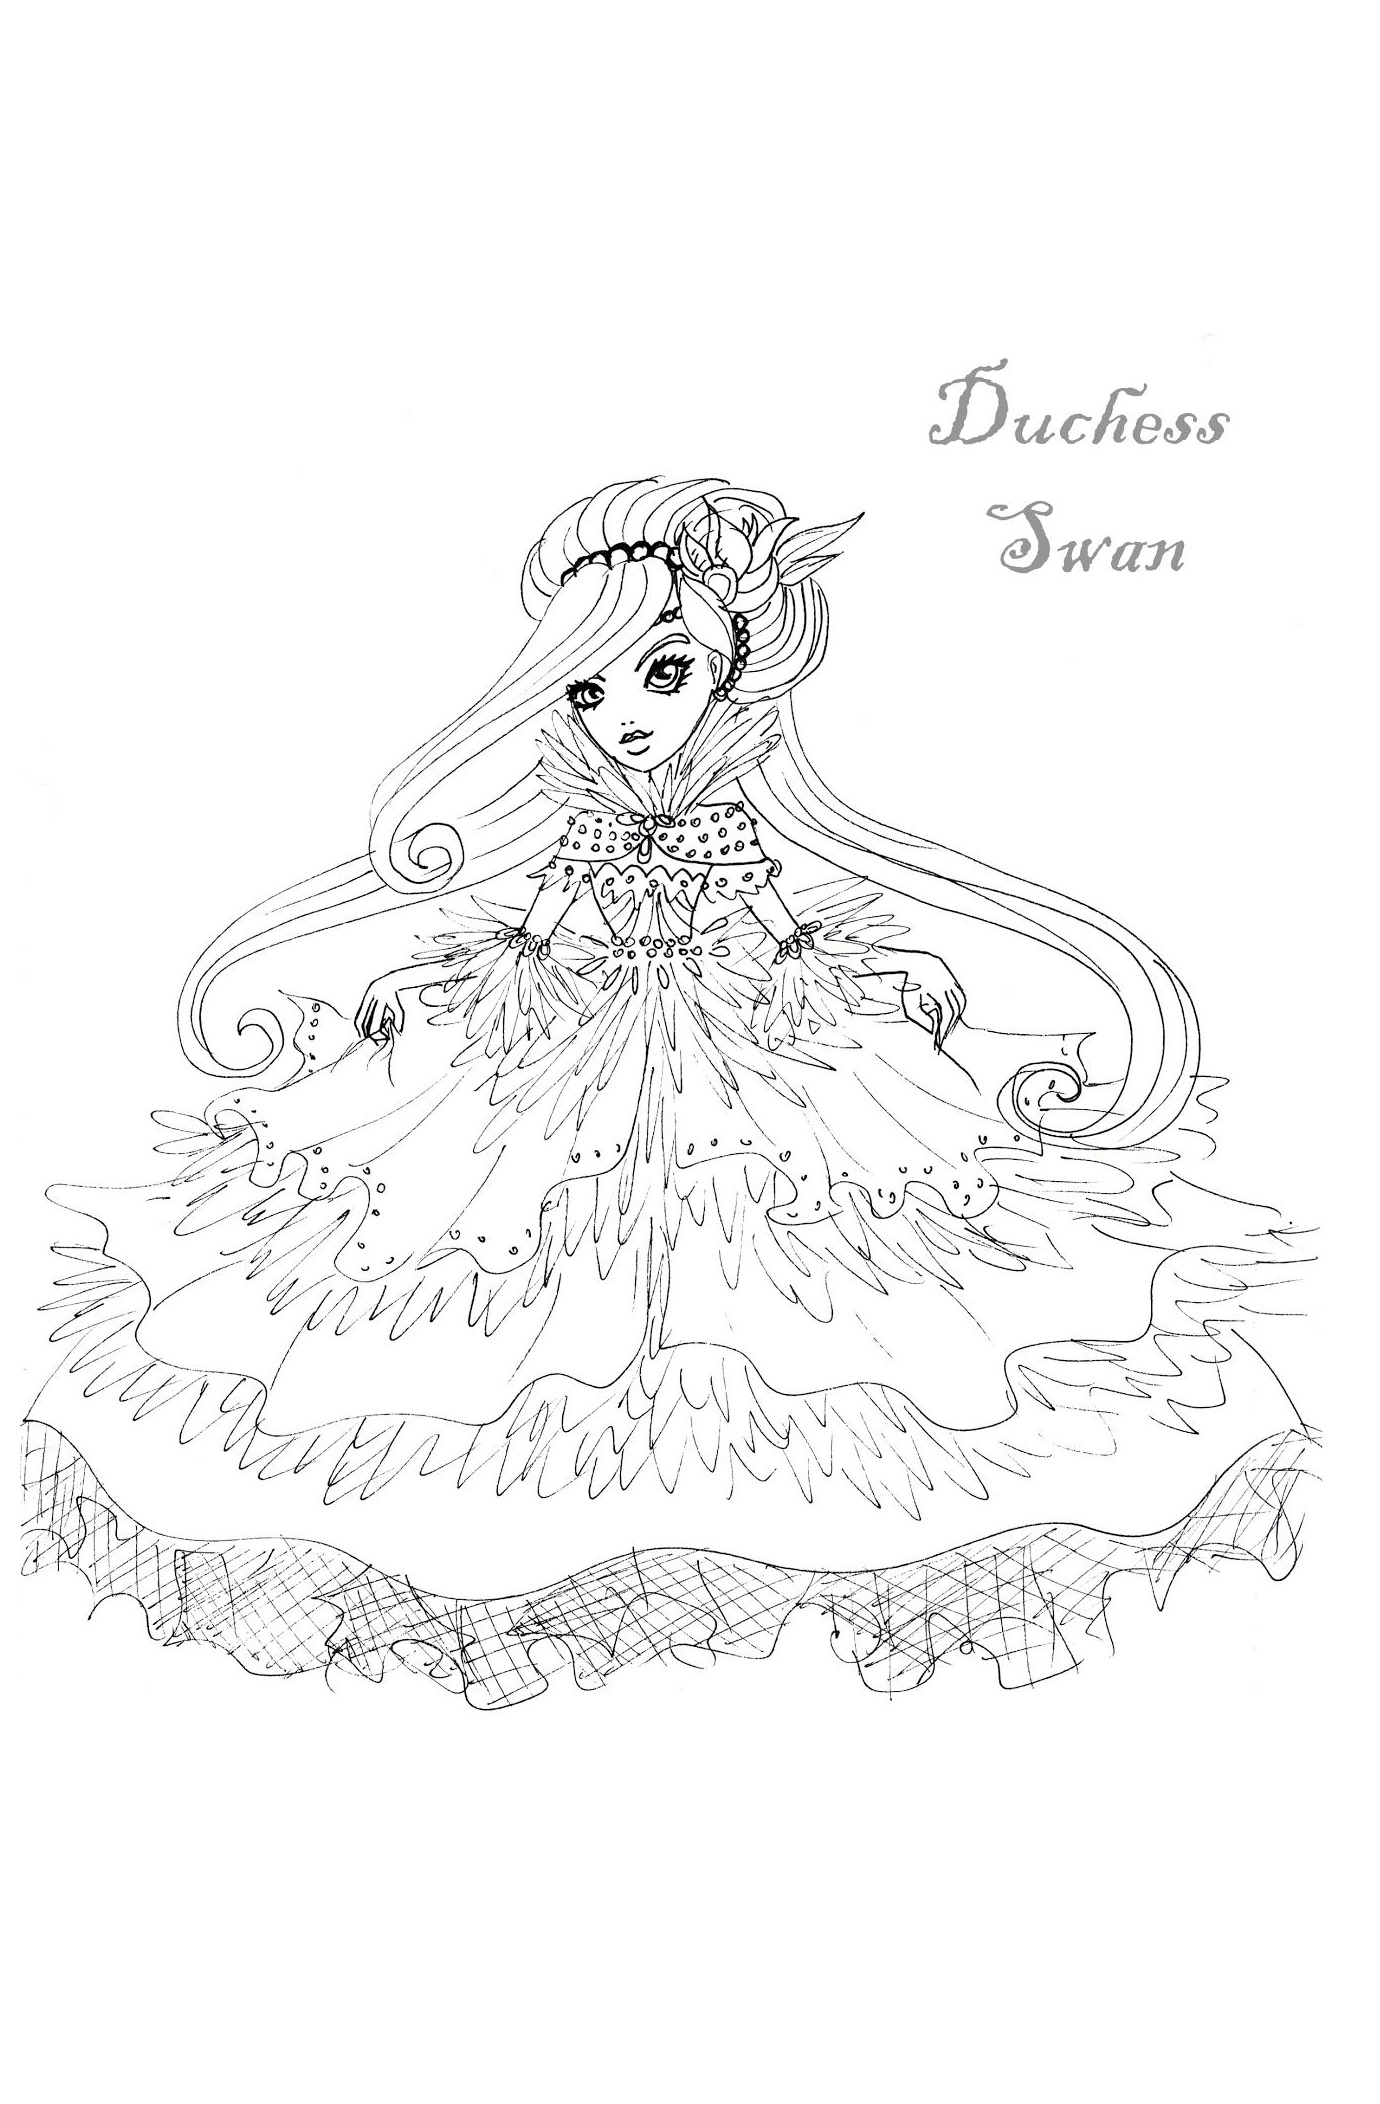 ever after high coloring pages duchess swan